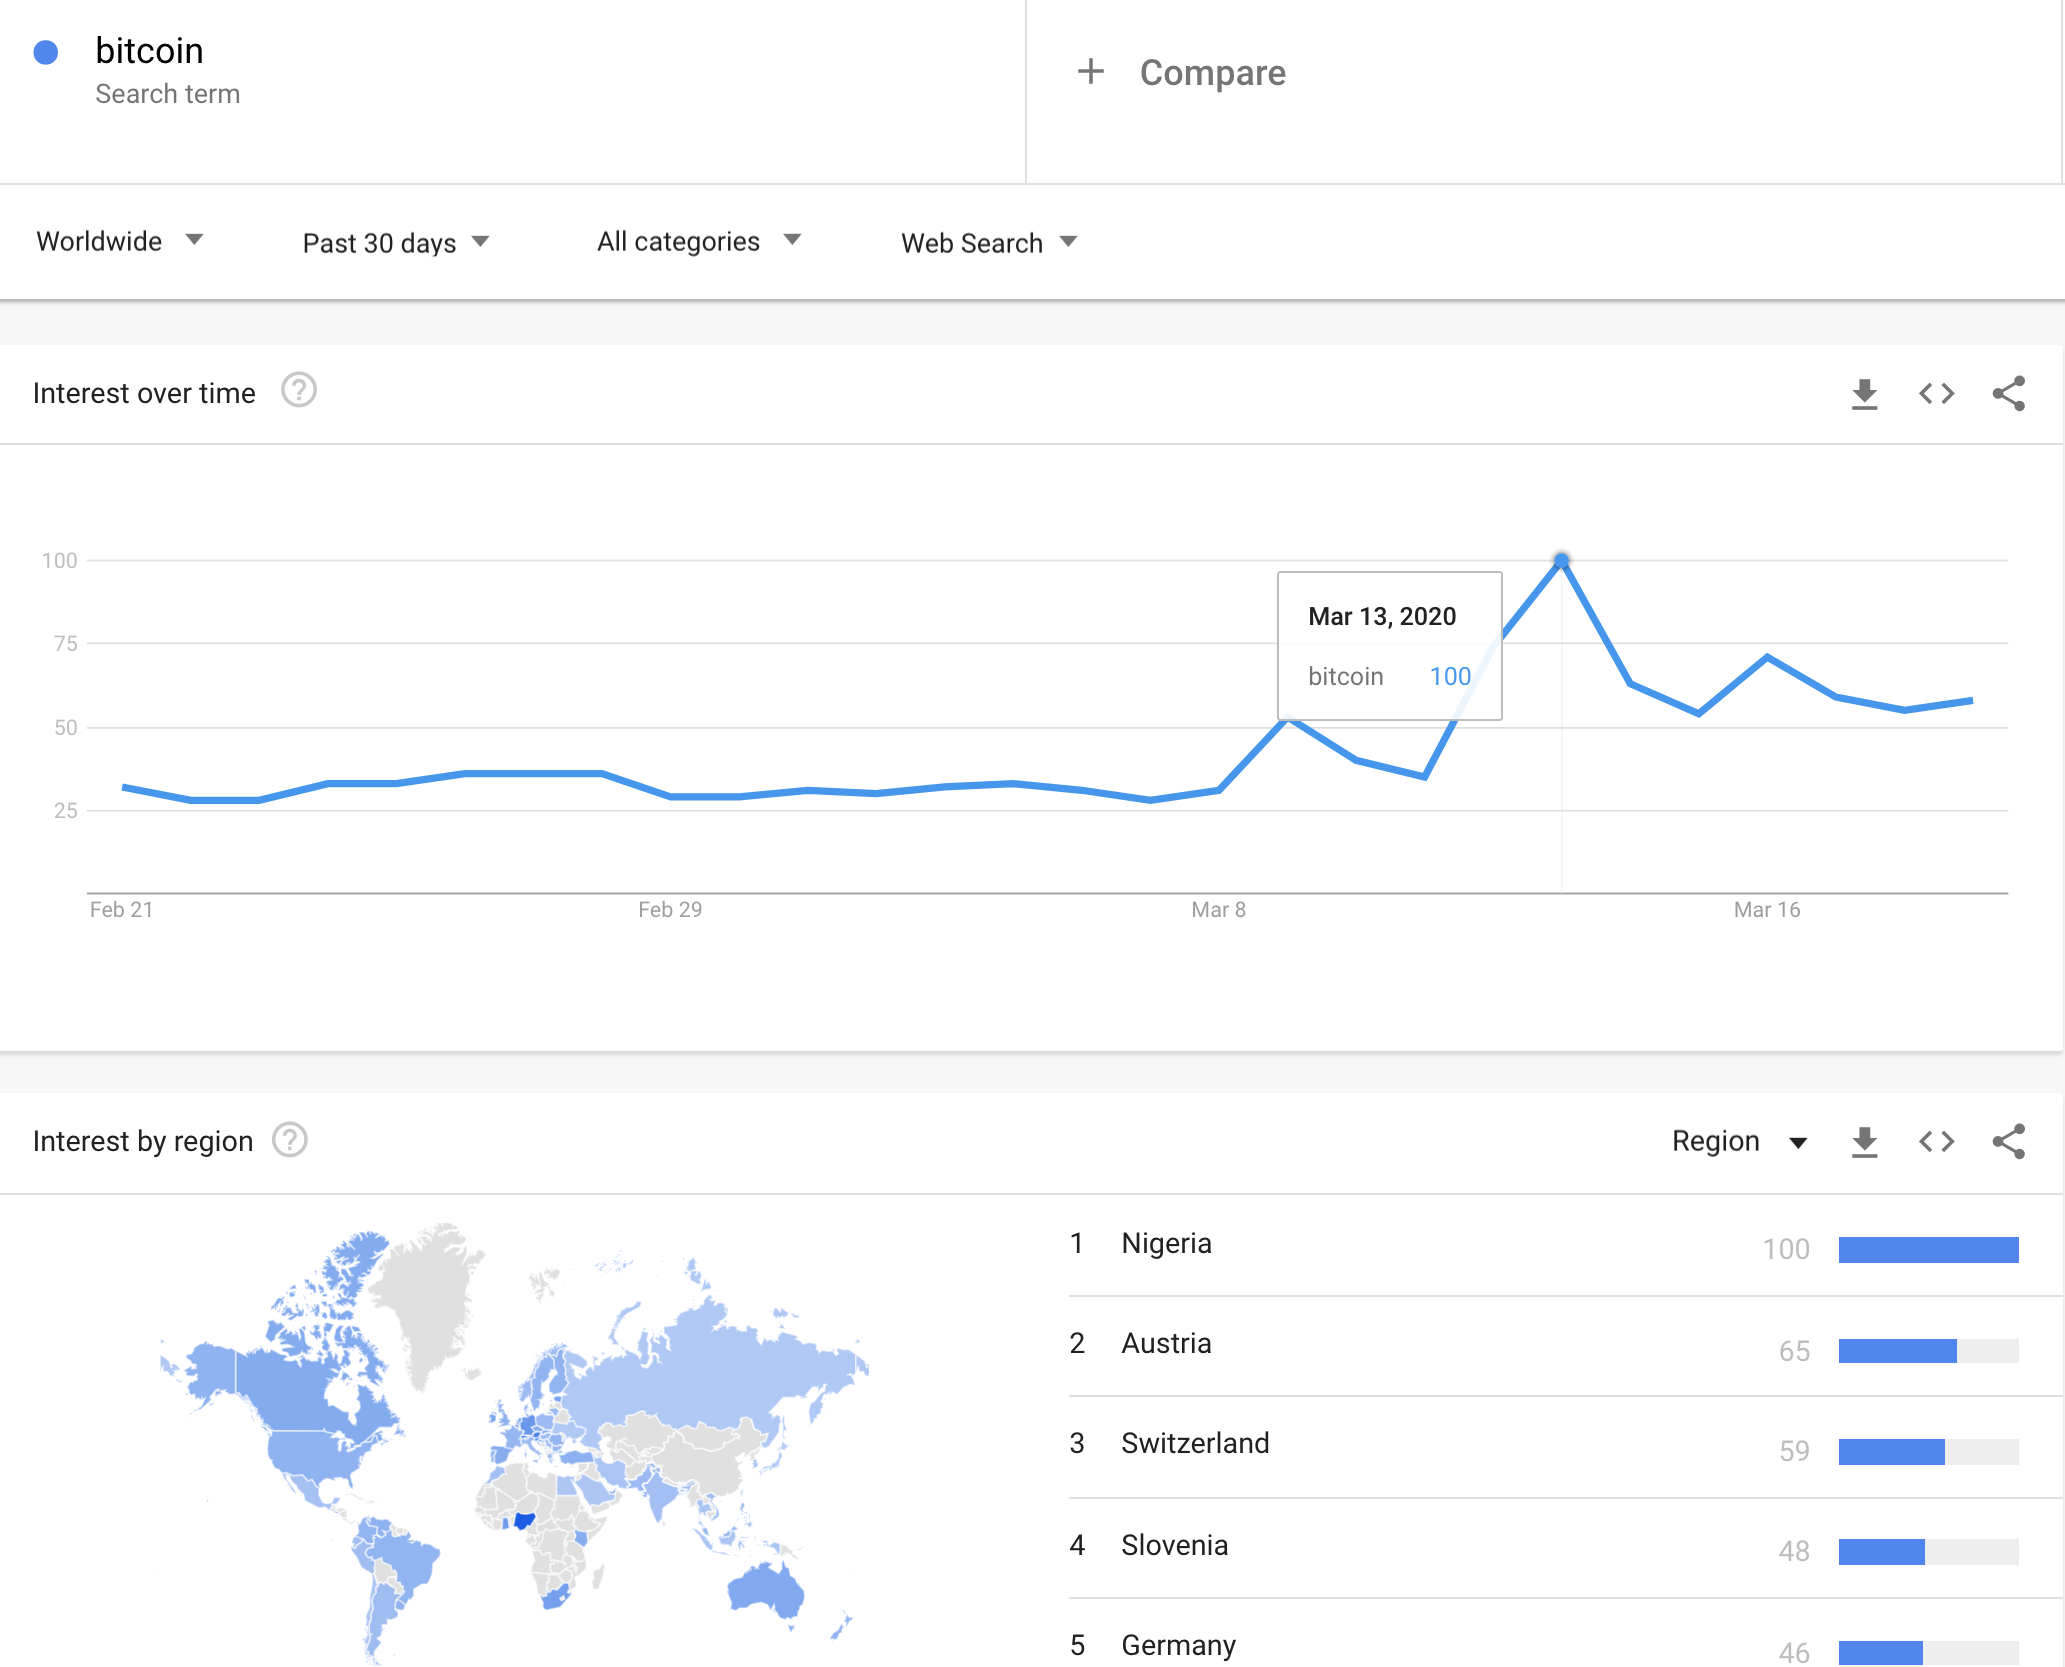 Over the past 30 days, the mix of countries in the top 5 of Google searches on Bitcoin sharply shifted.